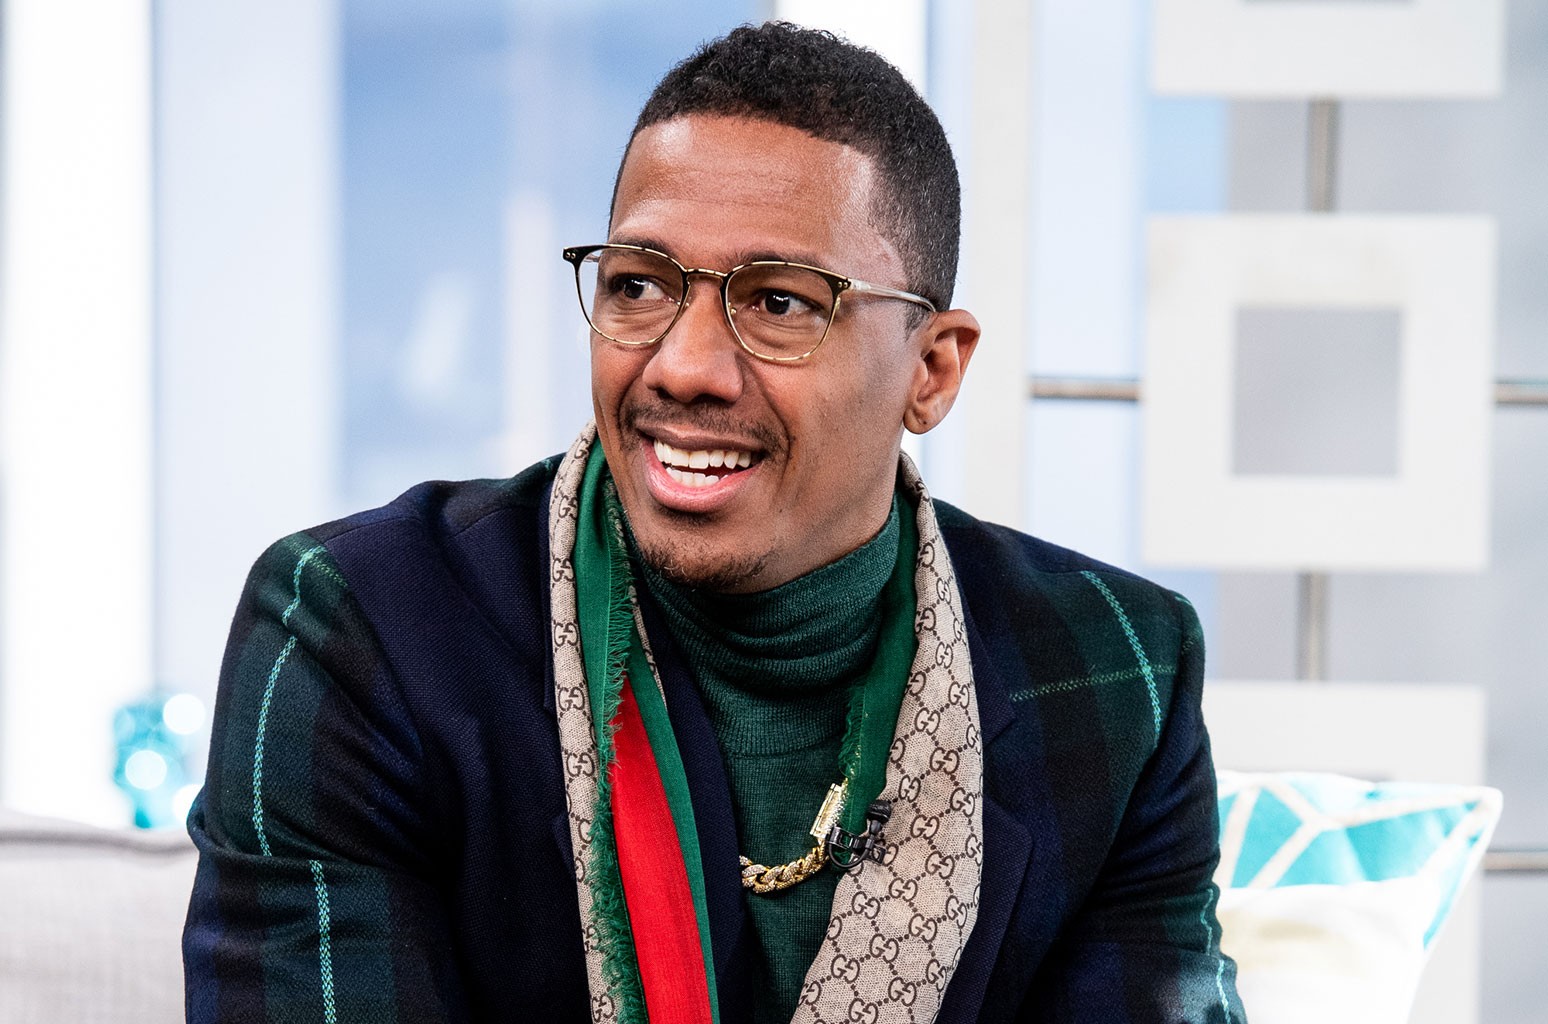 Nick Cannon Opens up on His Love Life, Says He Is Considering a Vasectomy